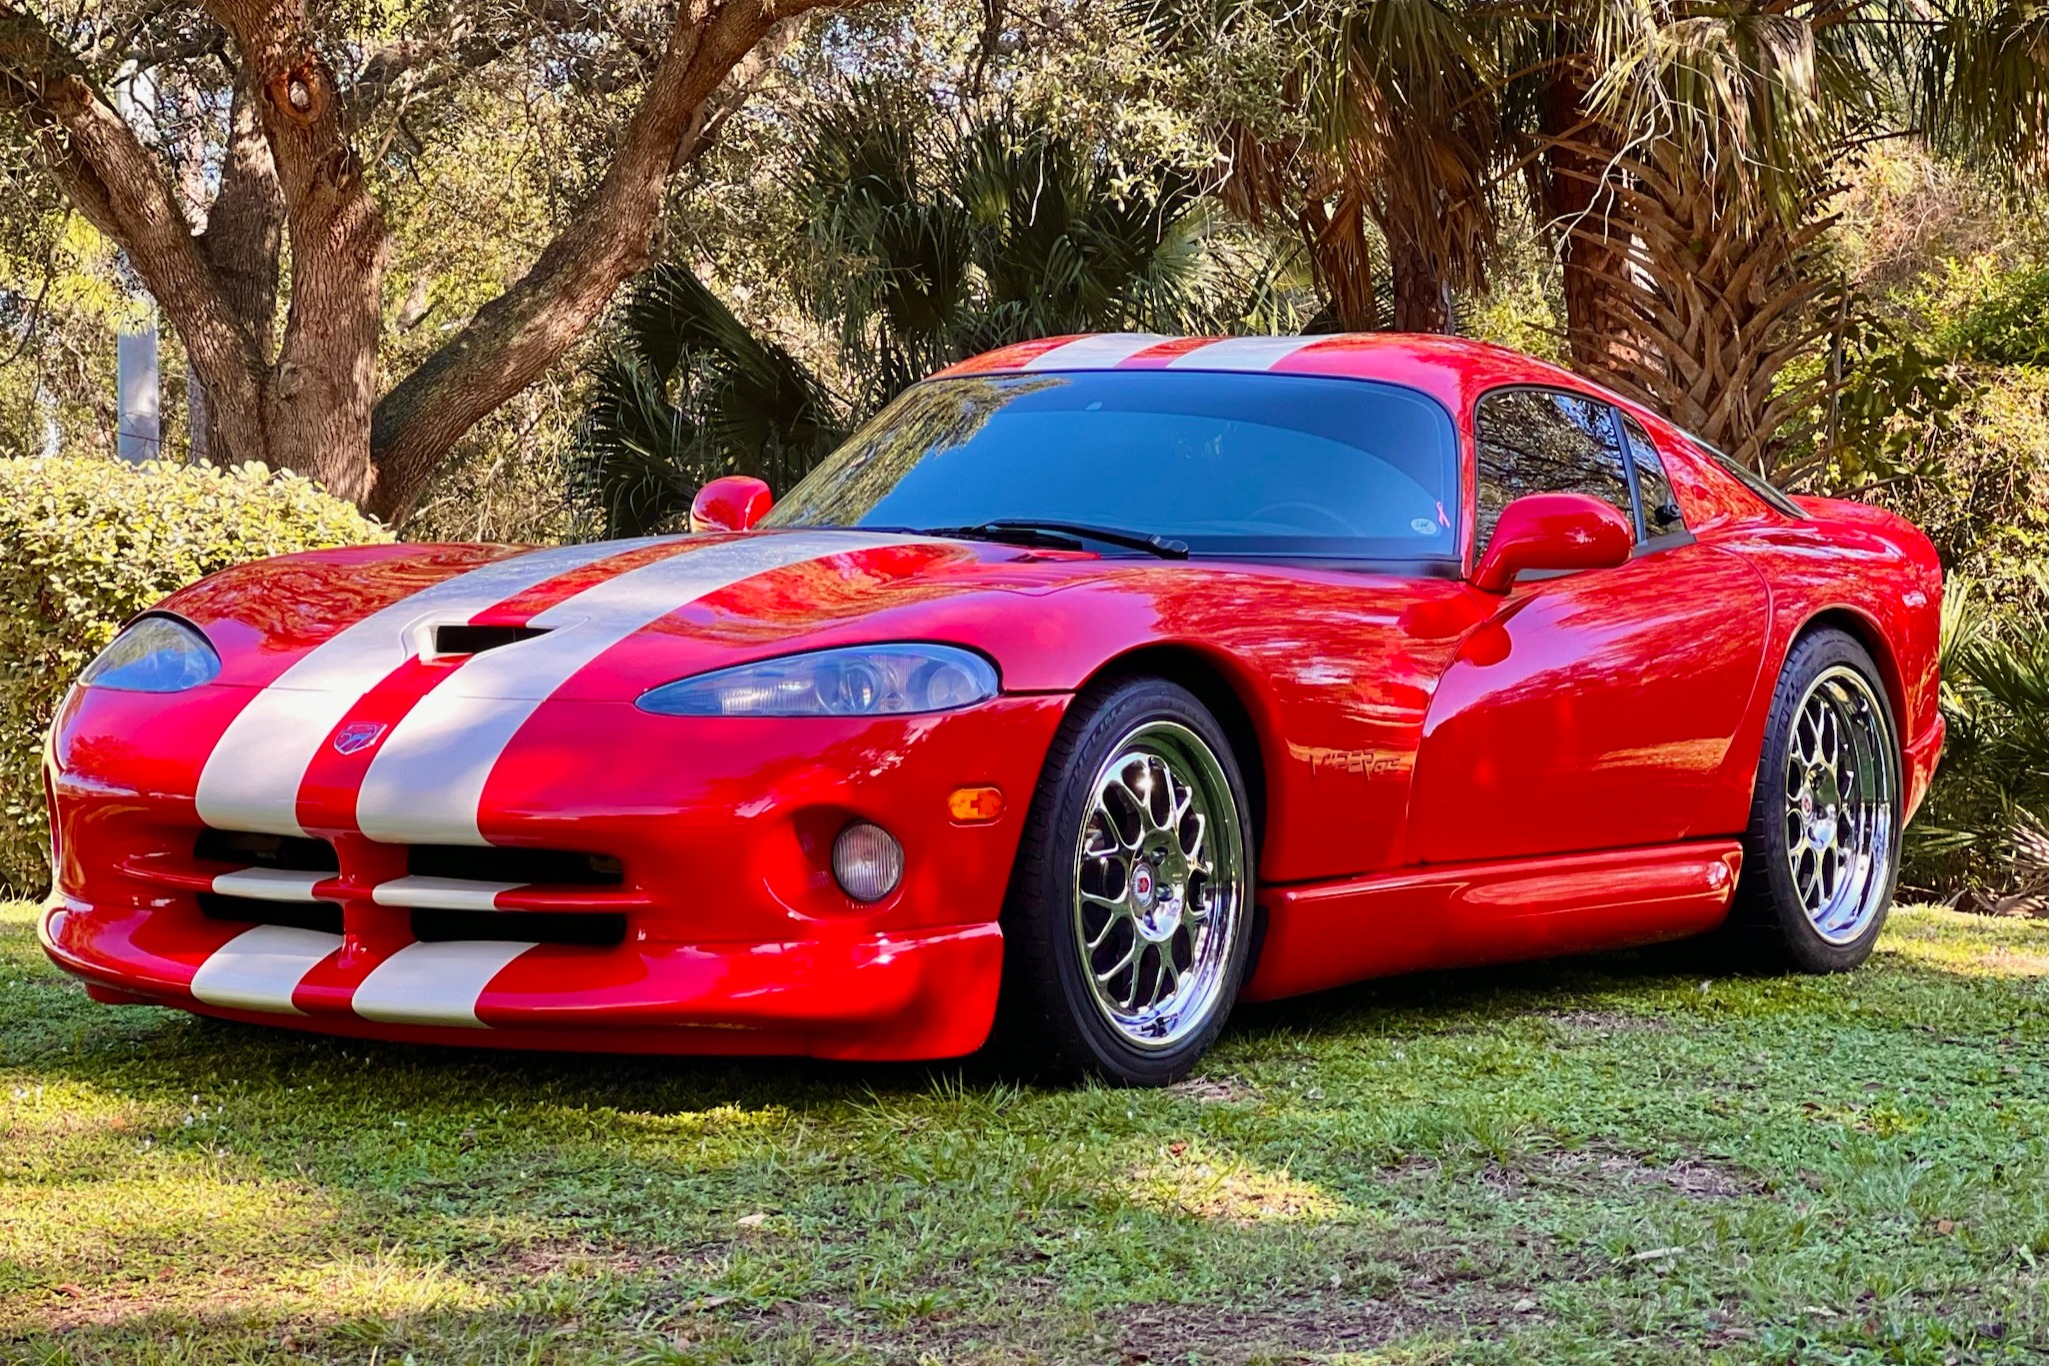 Used 10k-Mile 2002 Dodge Viper GTS Final Edition Review